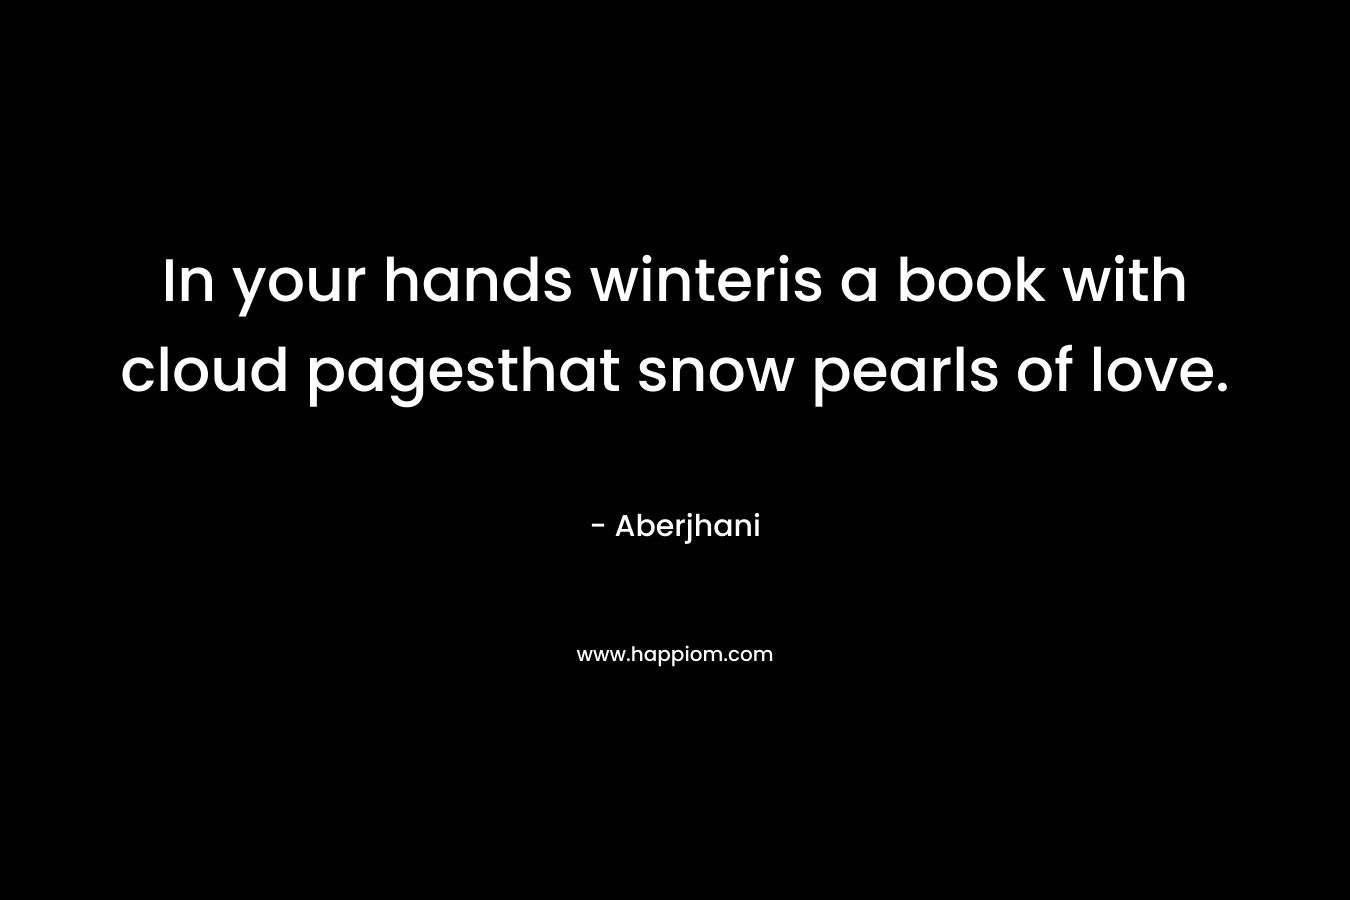 In your hands winteris a book with cloud pagesthat snow pearls of love. – Aberjhani